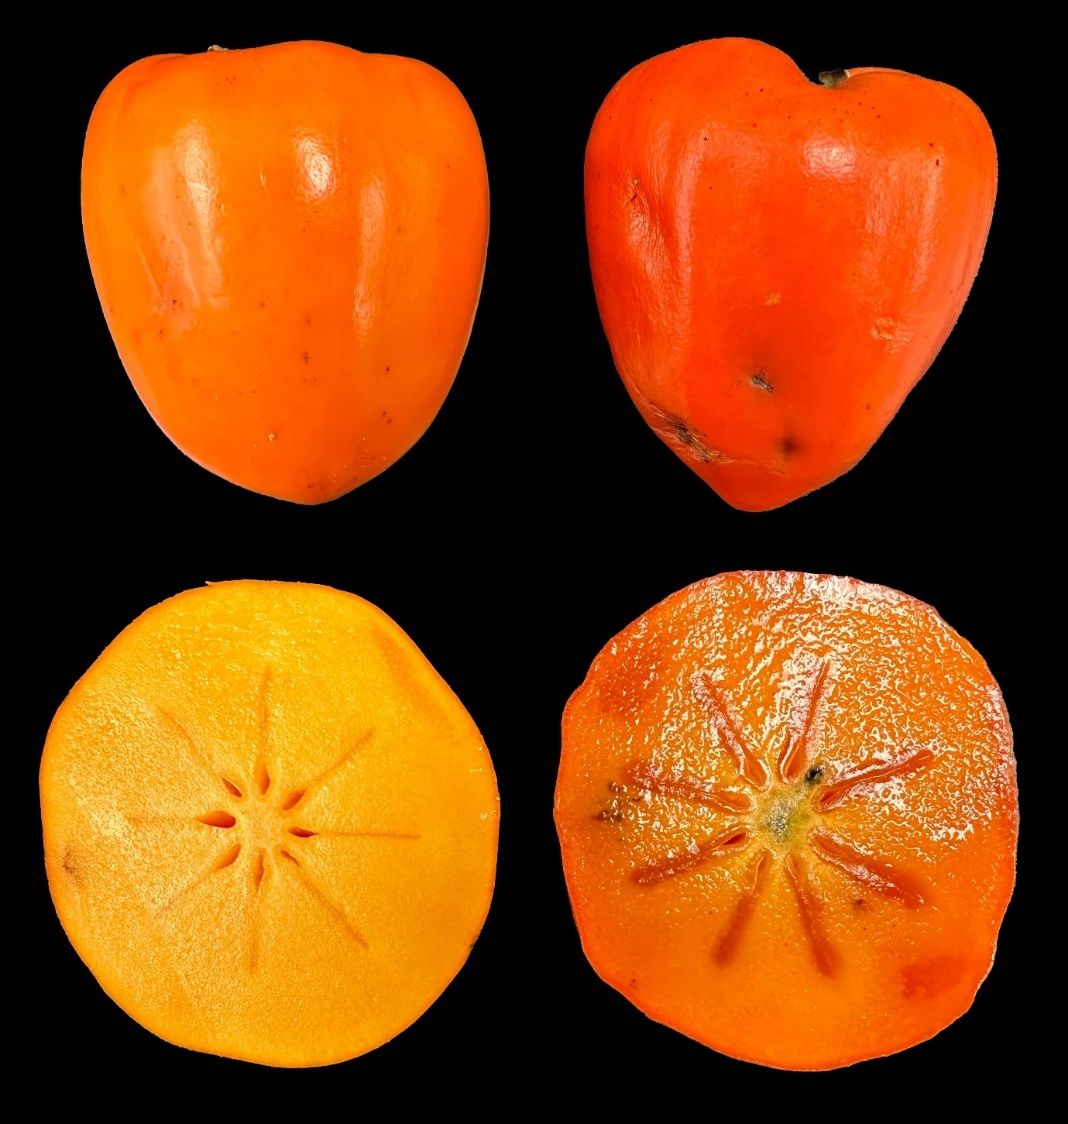 Intact (top) and cross-section (bottom) of astringent-type ‘Hachiya’ fruit at firm stage (left) and after ripening at room temperature to become non-astringent (right).